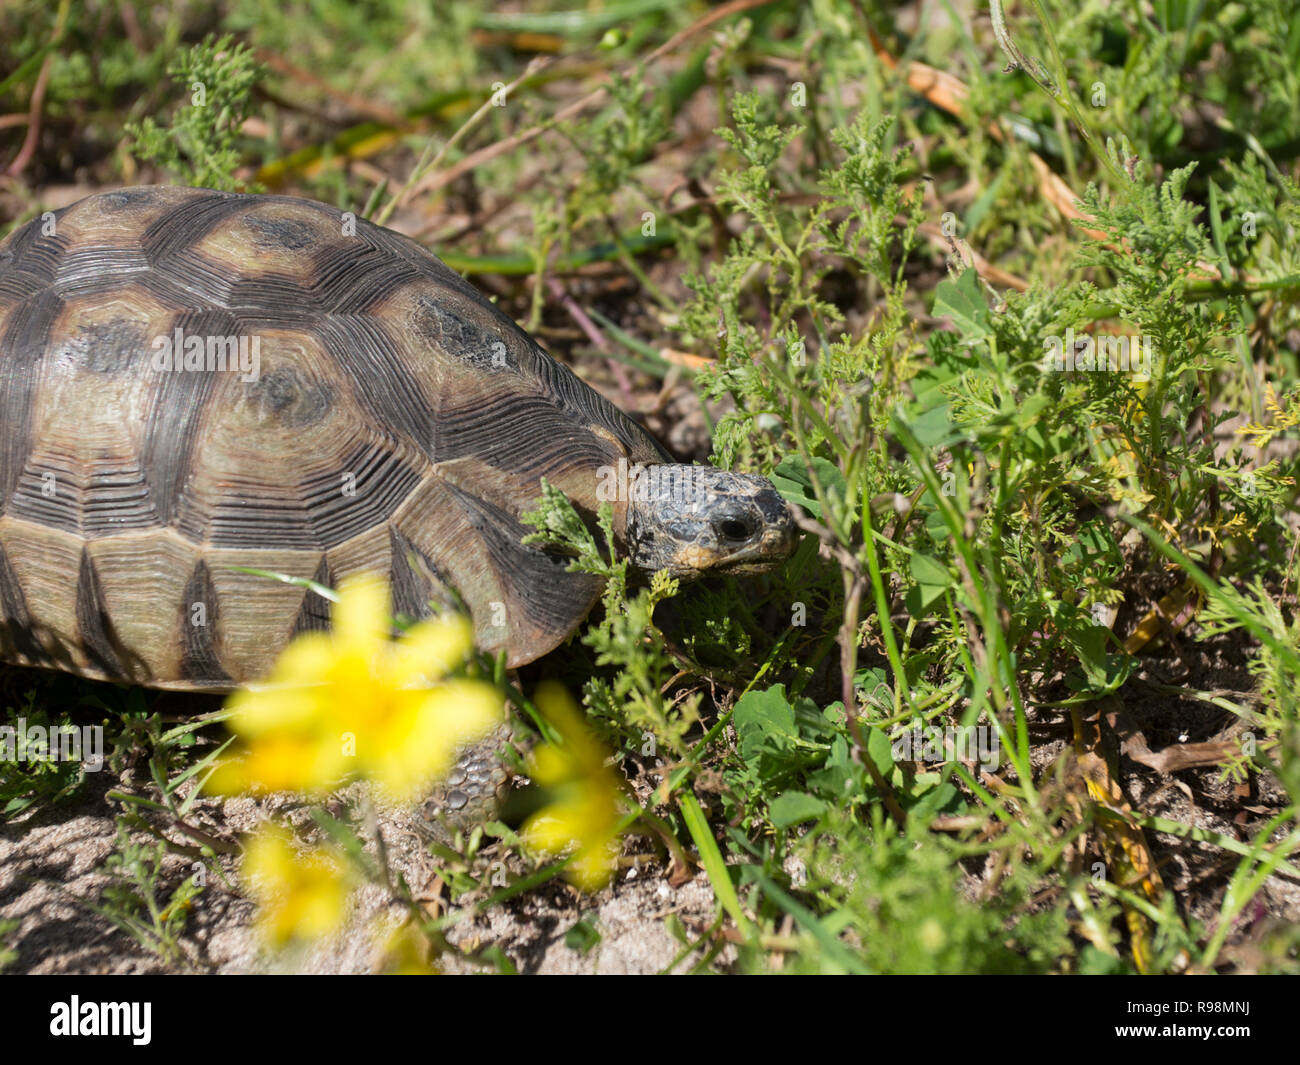 A Angulated tortoise in the West Coast National Park South Africa Stock Photo